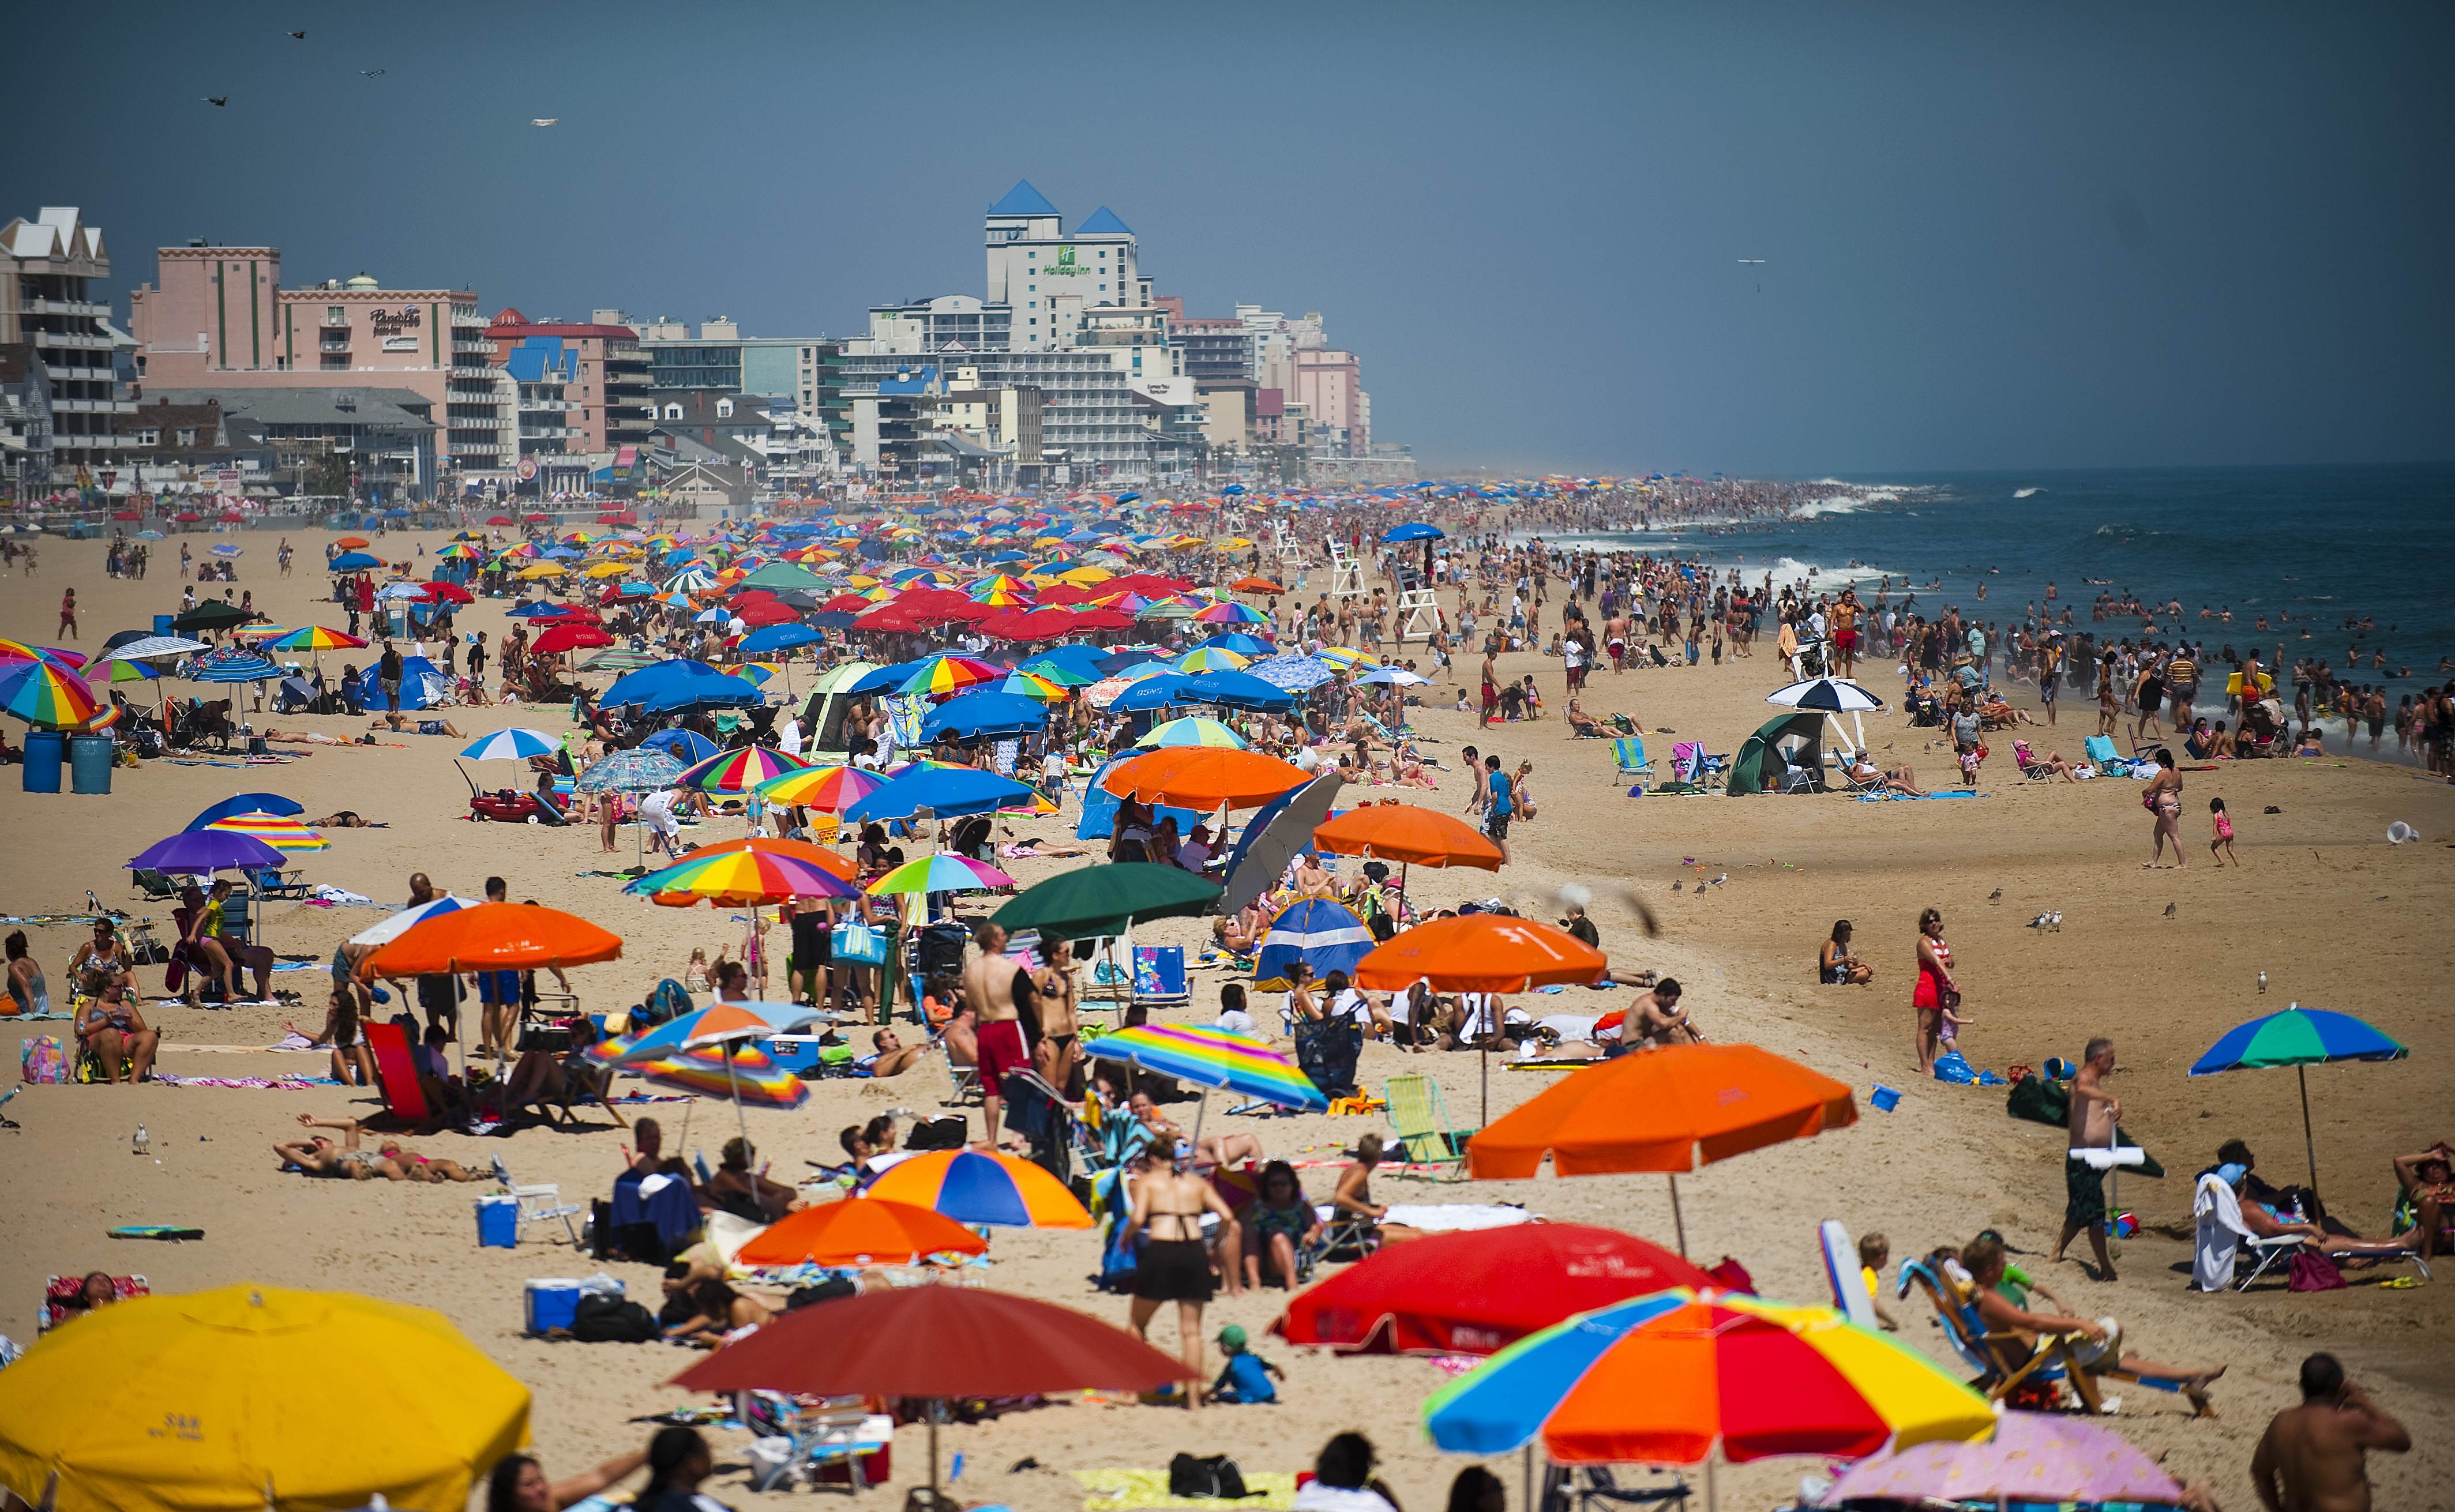 People line the beach in Ocean City, Maryland, on Aug. 29, 2010. (JIM WATSON—AFP/Getty Images)